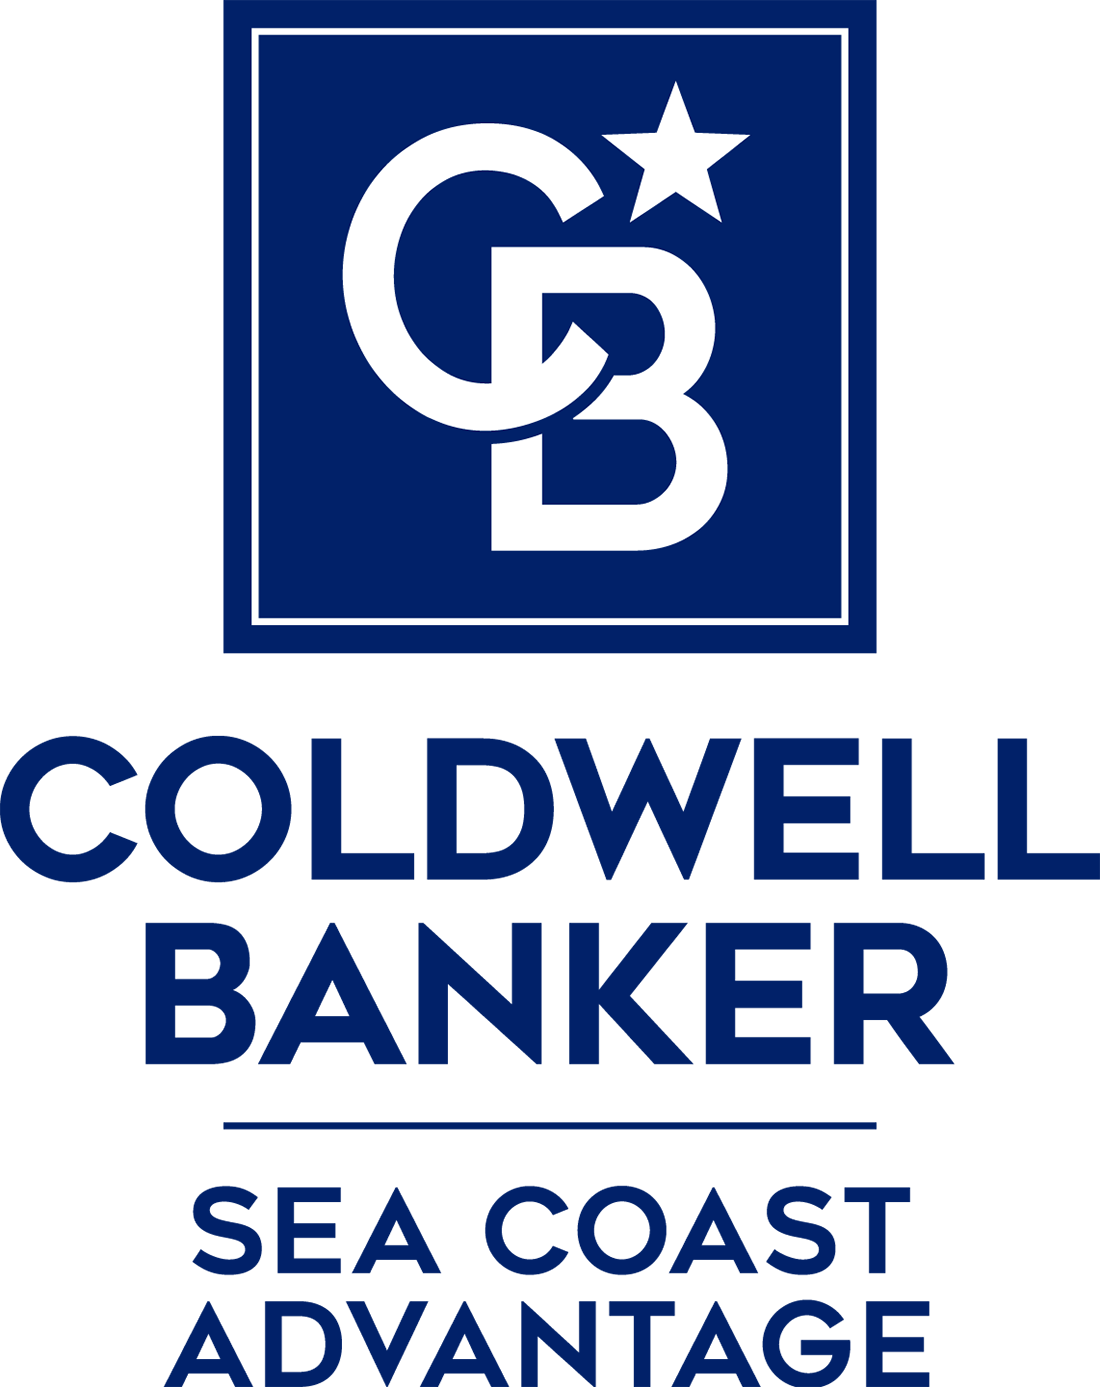 Lewis Bowers - Coldwell Banker Chicora Logo